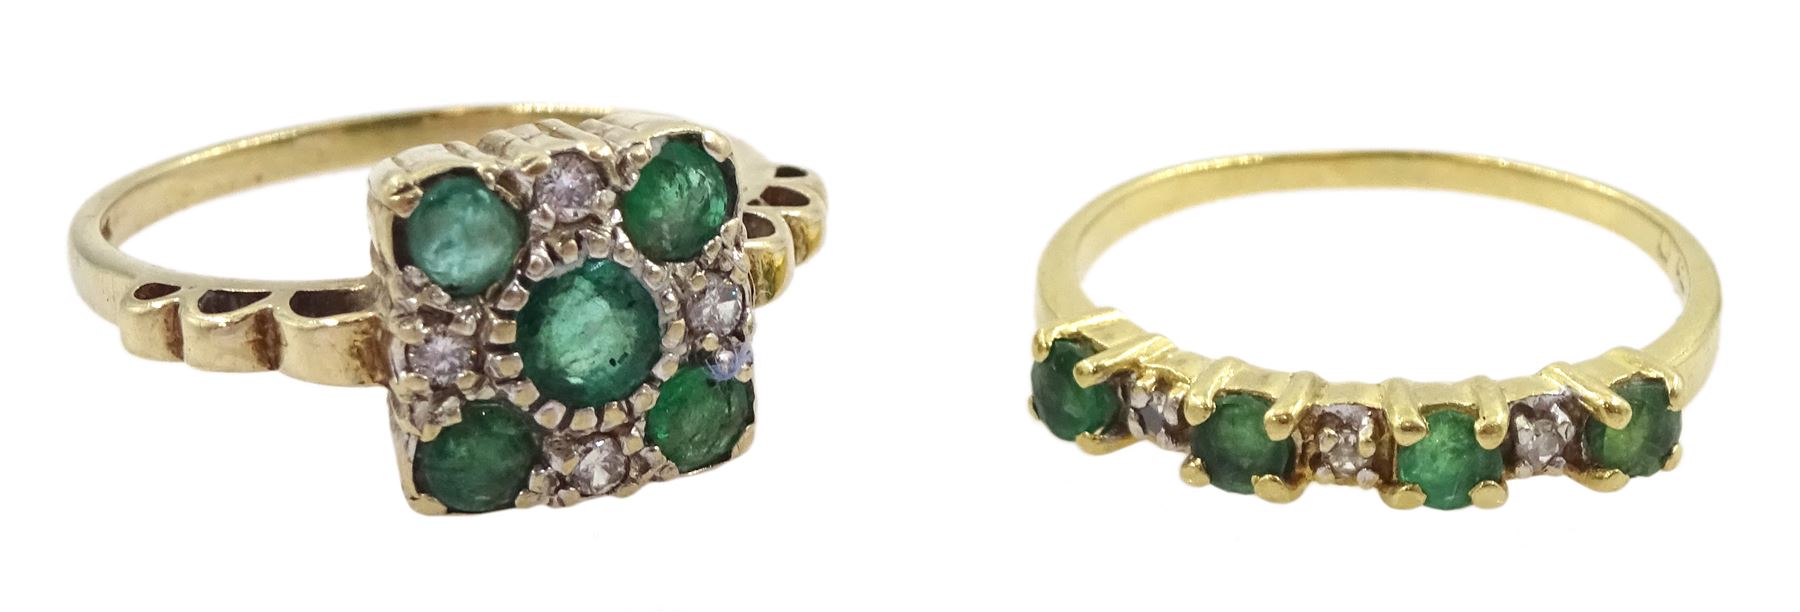 9ct gold emerald and diamond square panel ring and an 18ct gold seven stone emerald and diamond ring